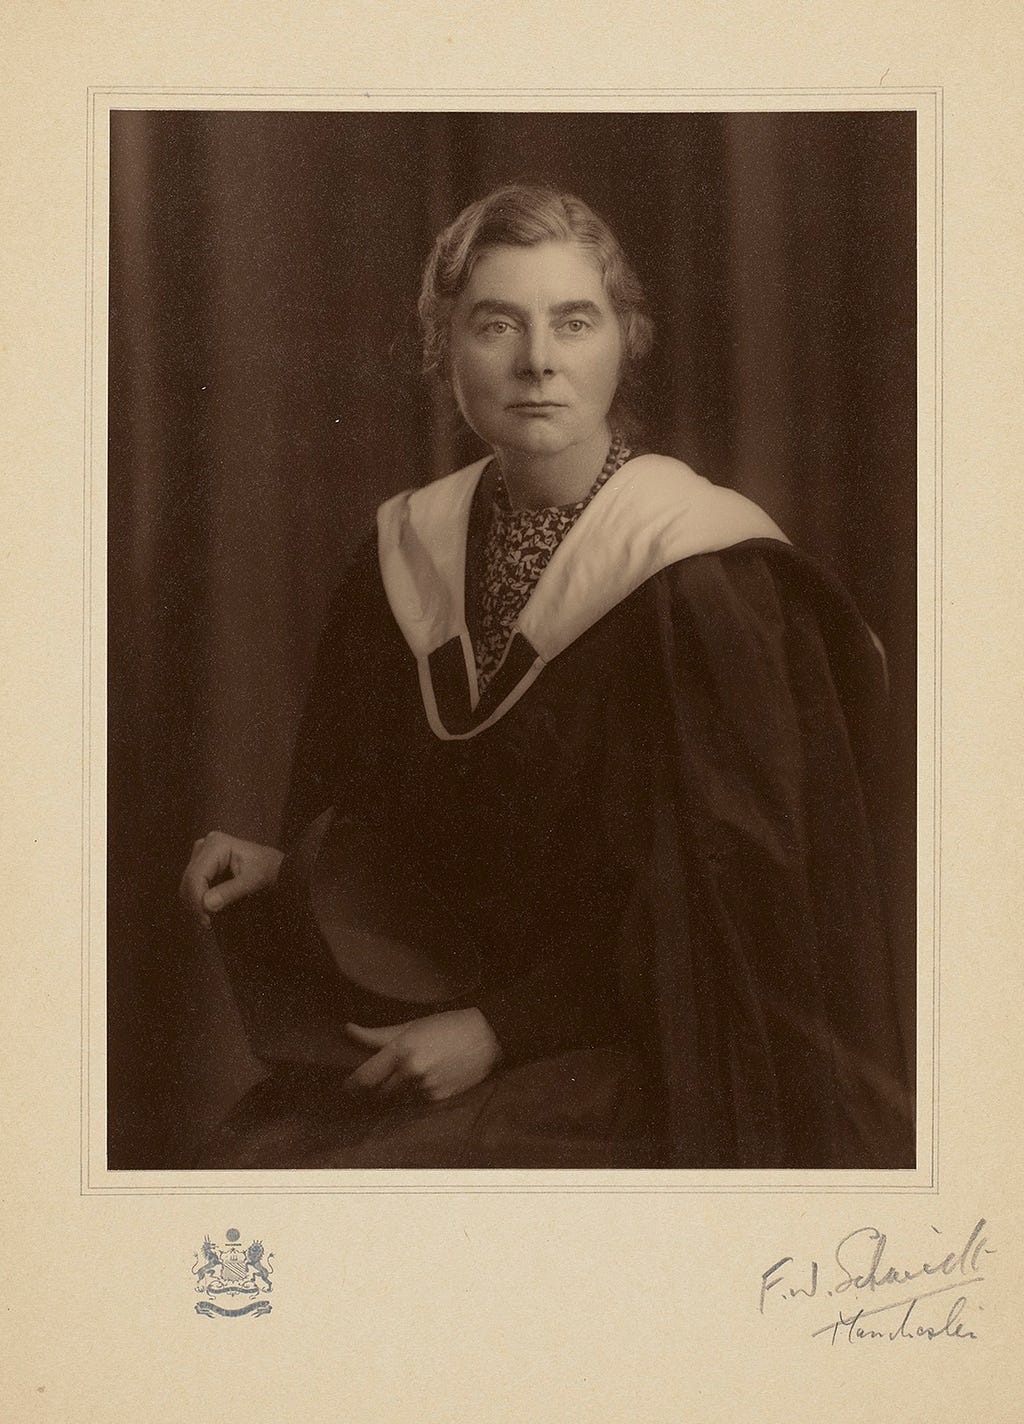 Studio portrait photograph of Margaret Pilkington with cap and gown after receiving her Honorary M.A., 1942